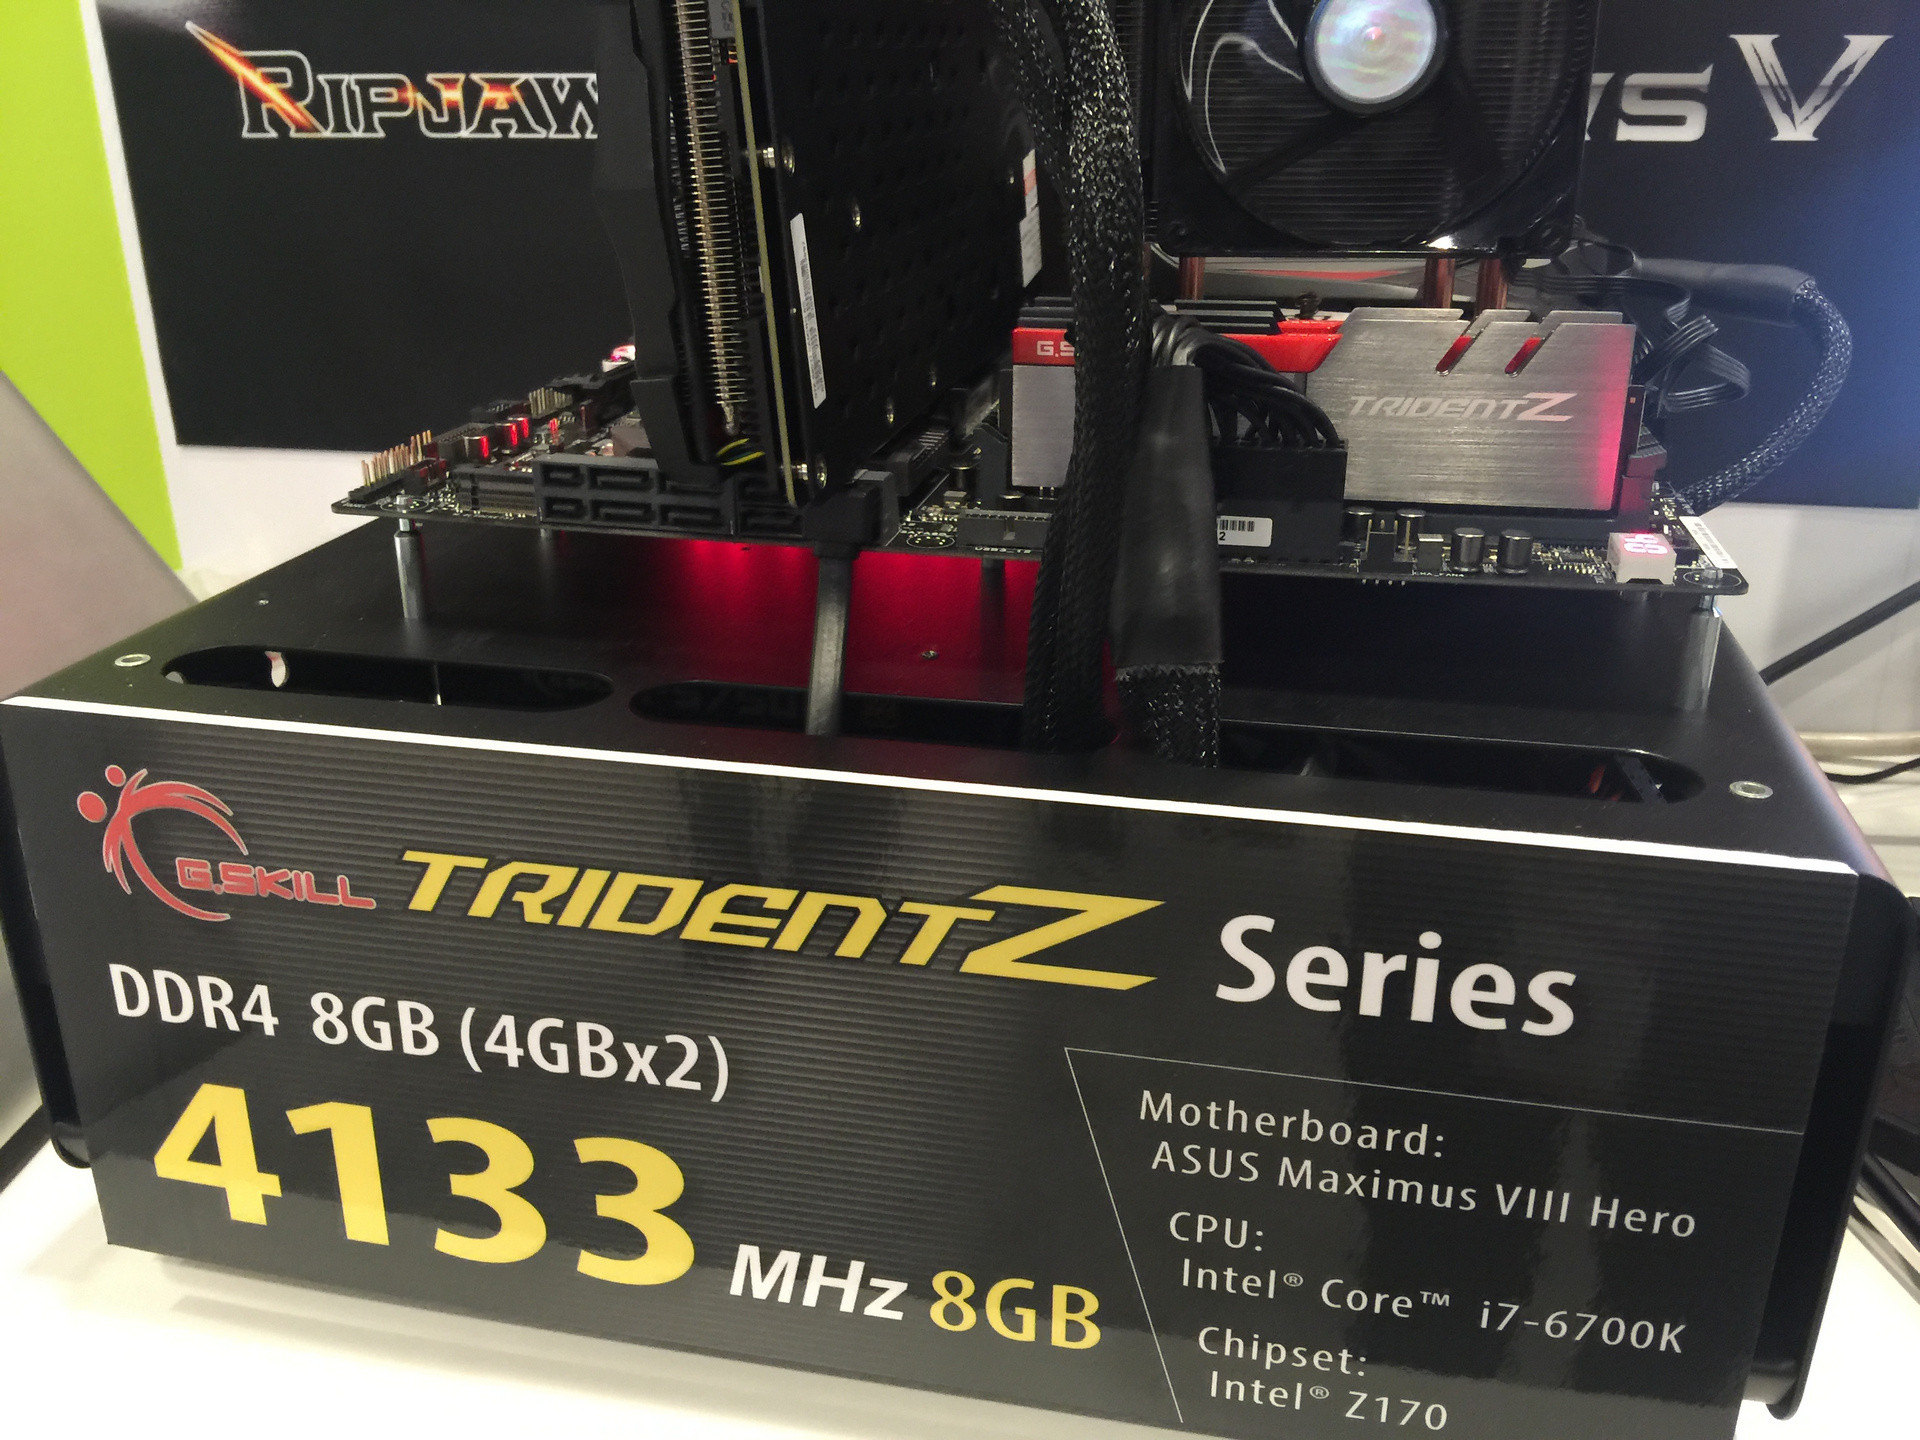 G.SKILL Demos DDR4 4266MHz and DDR4 4133MHz Memory Kits | TechPowerUp